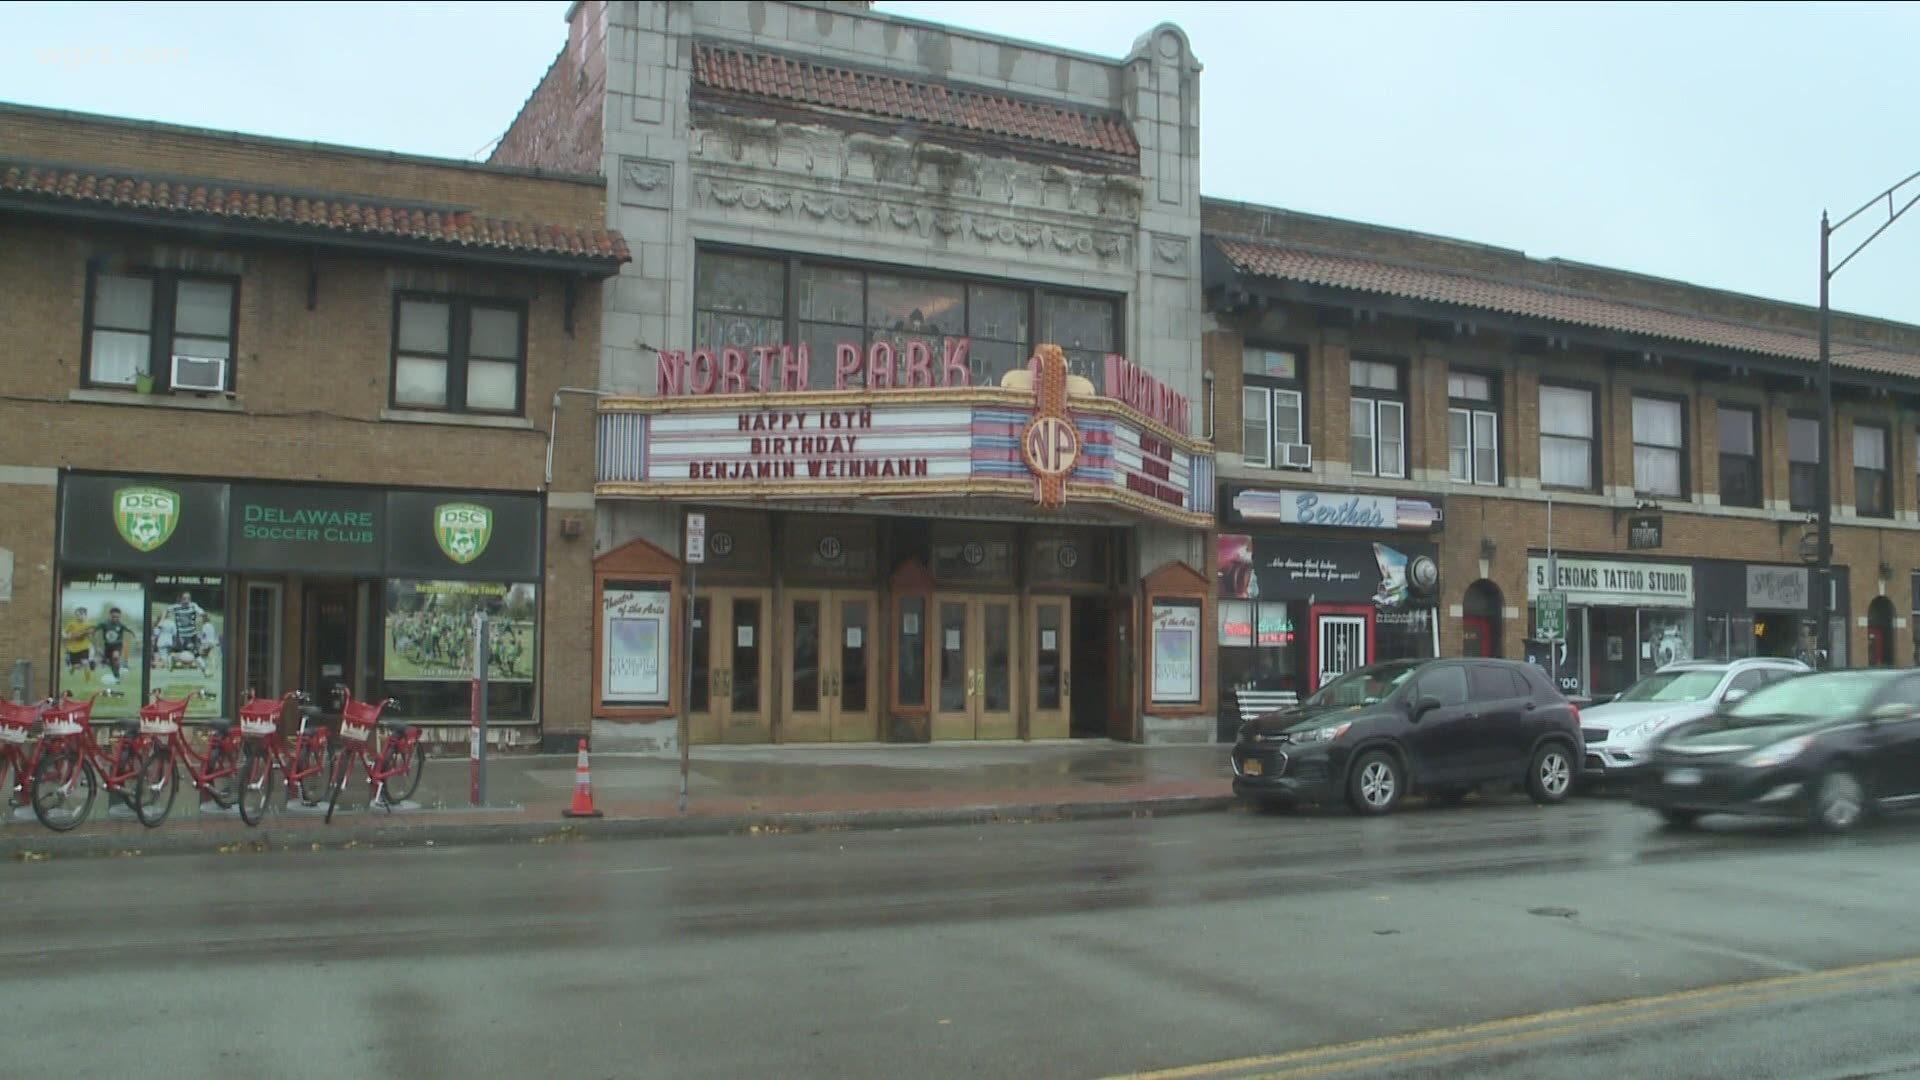 Trying to make the most of a tough situation for movie theaters, the North Park Theatre on Hertel Avenue in Buffalo says it will be renting out its auditorium.